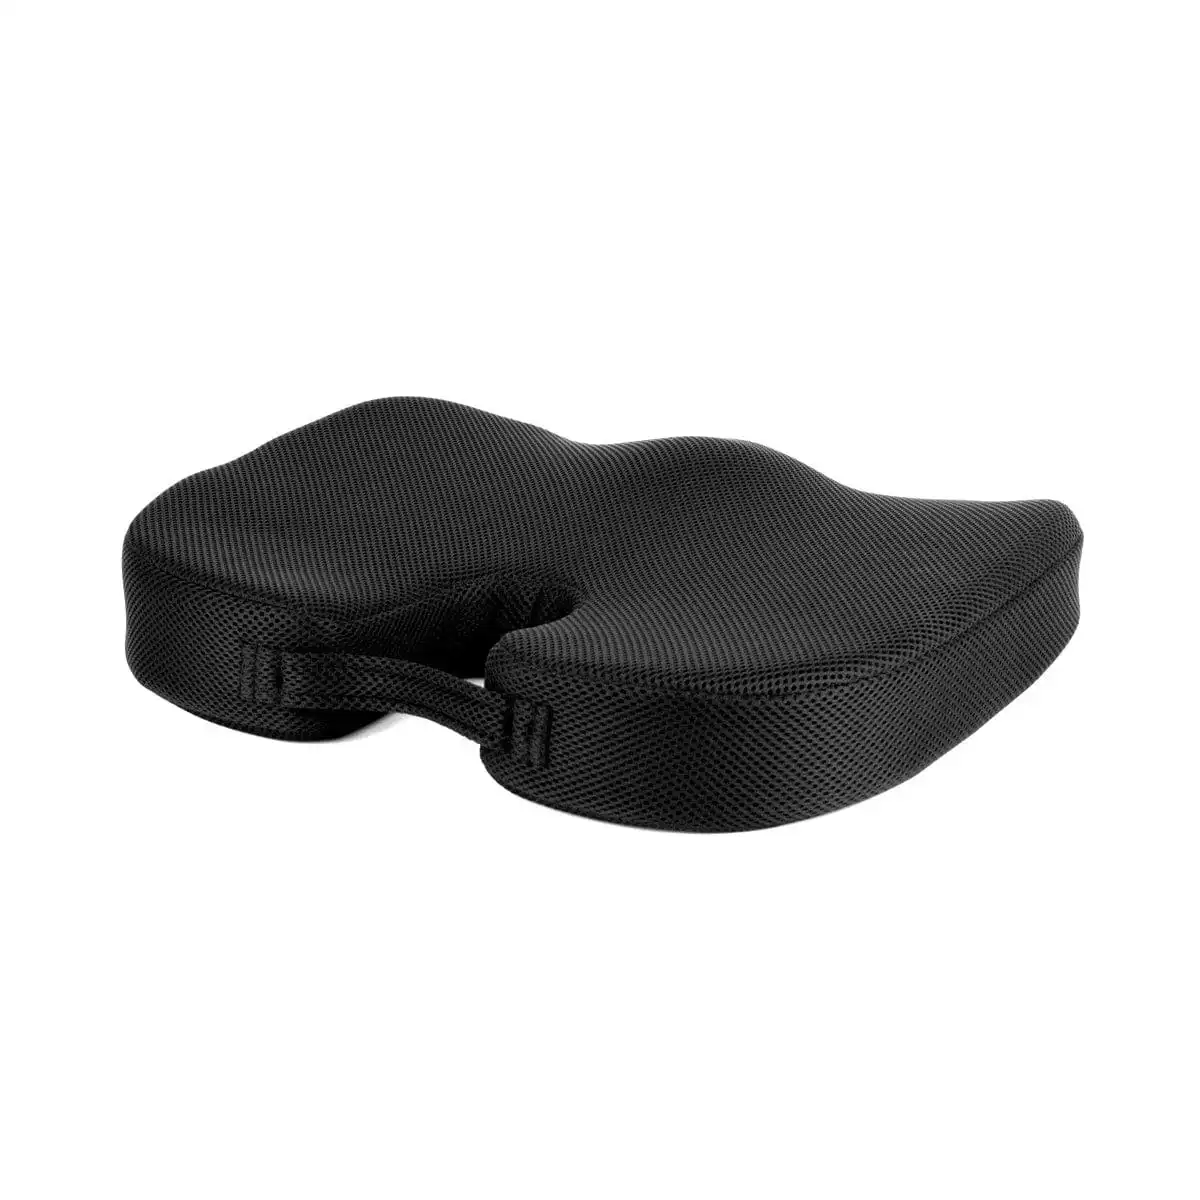 Memory Foam Car Office Seat Cushion with Black Cover